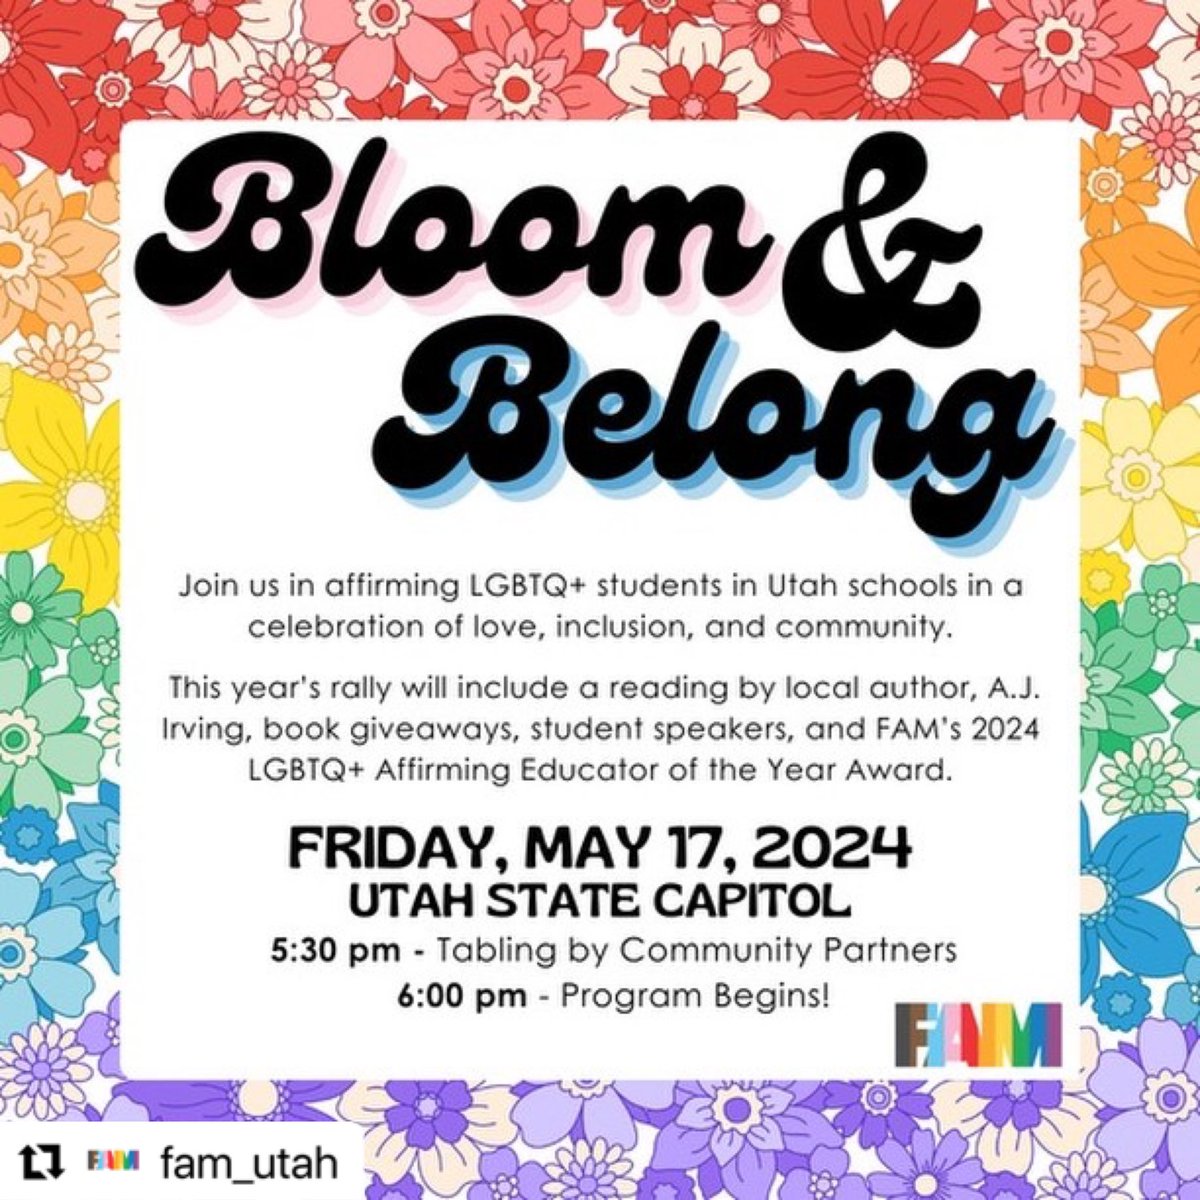 Utah friends! I hope you will join me in supporting LGBTQ+ youth at the @fam_utah rally on Friday, May 17! I’m excited to read THE WISHING FLOWER by @kipalizadeh & me and celebrate the incredible work @fam_utah does for our students and teachers! 🏳️‍🌈 💖🏳️‍⚧️ #lgbtq #kidlit